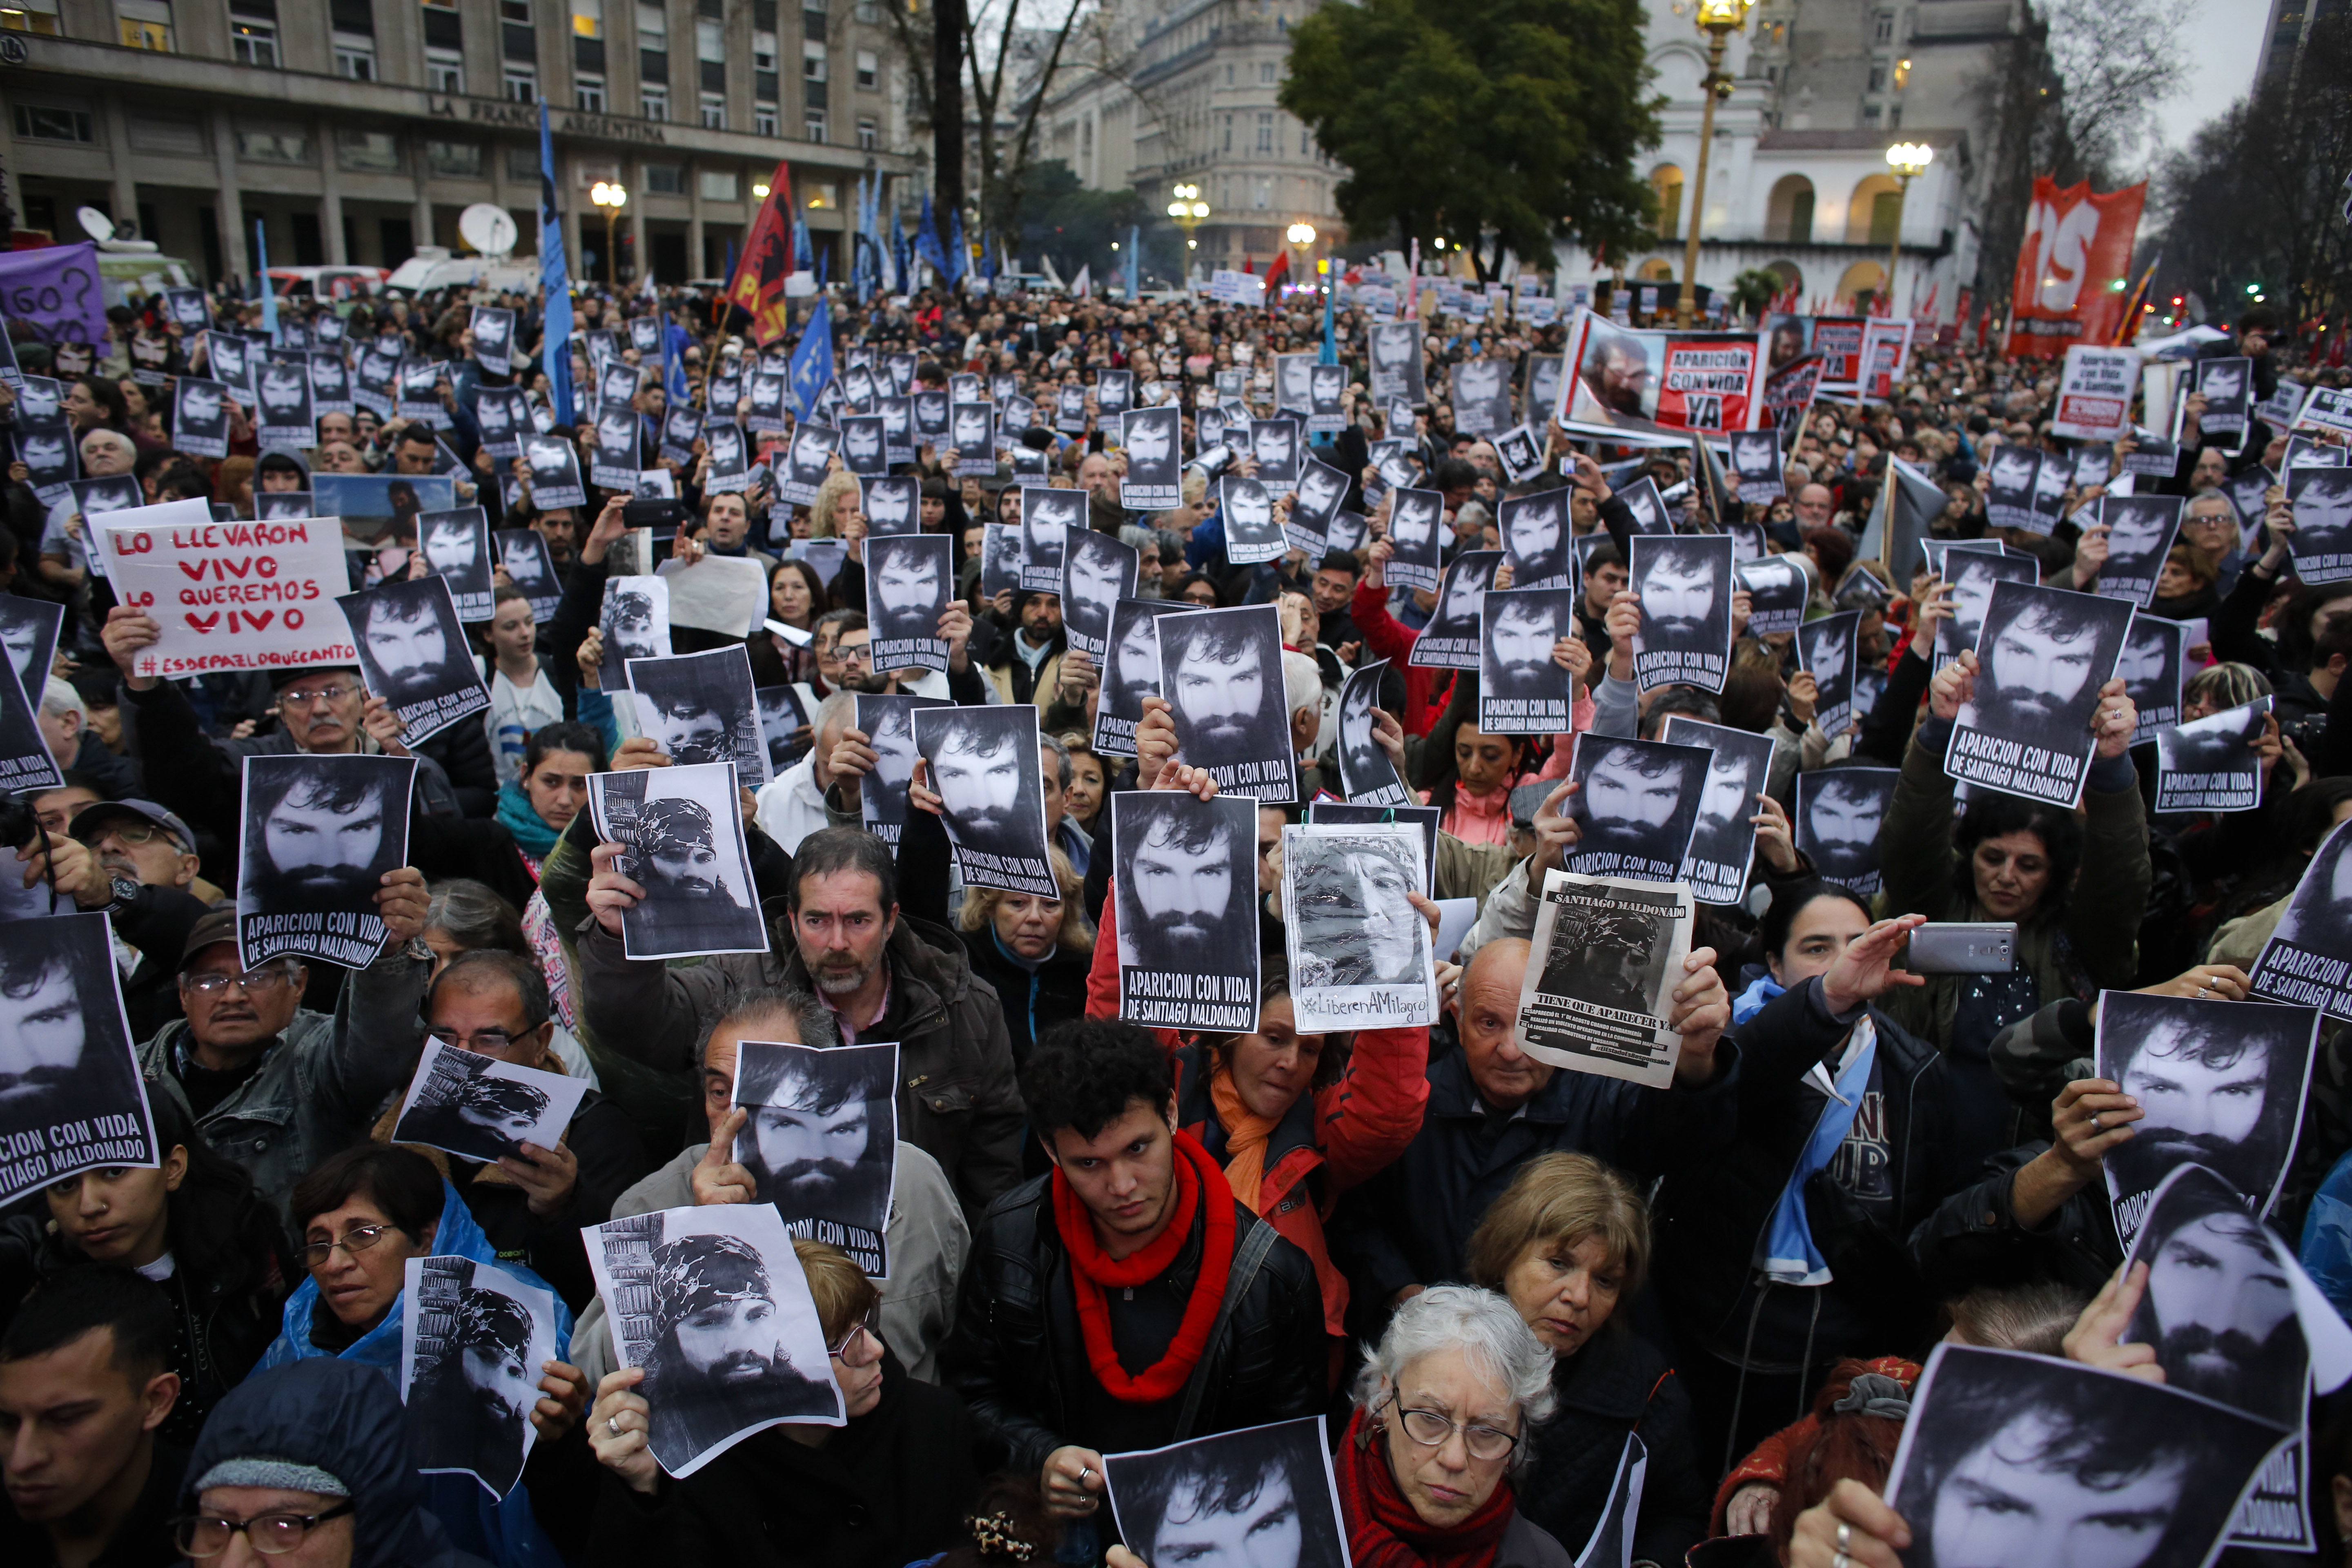 People hold photos of Santiago Maldonado, who's missing, during a demonstration at Plaza de Mayo in Buenos Aires, Argentina, Friday, Aug. 11, 2017. Human rights groups say Maldonado went missing after Argentine border police captured him on Aug. 1 during an operative against Mapuche indigenous who were blocking a highway in Argentina's Patagonia. (AP Photo/Victor R. Caivano)